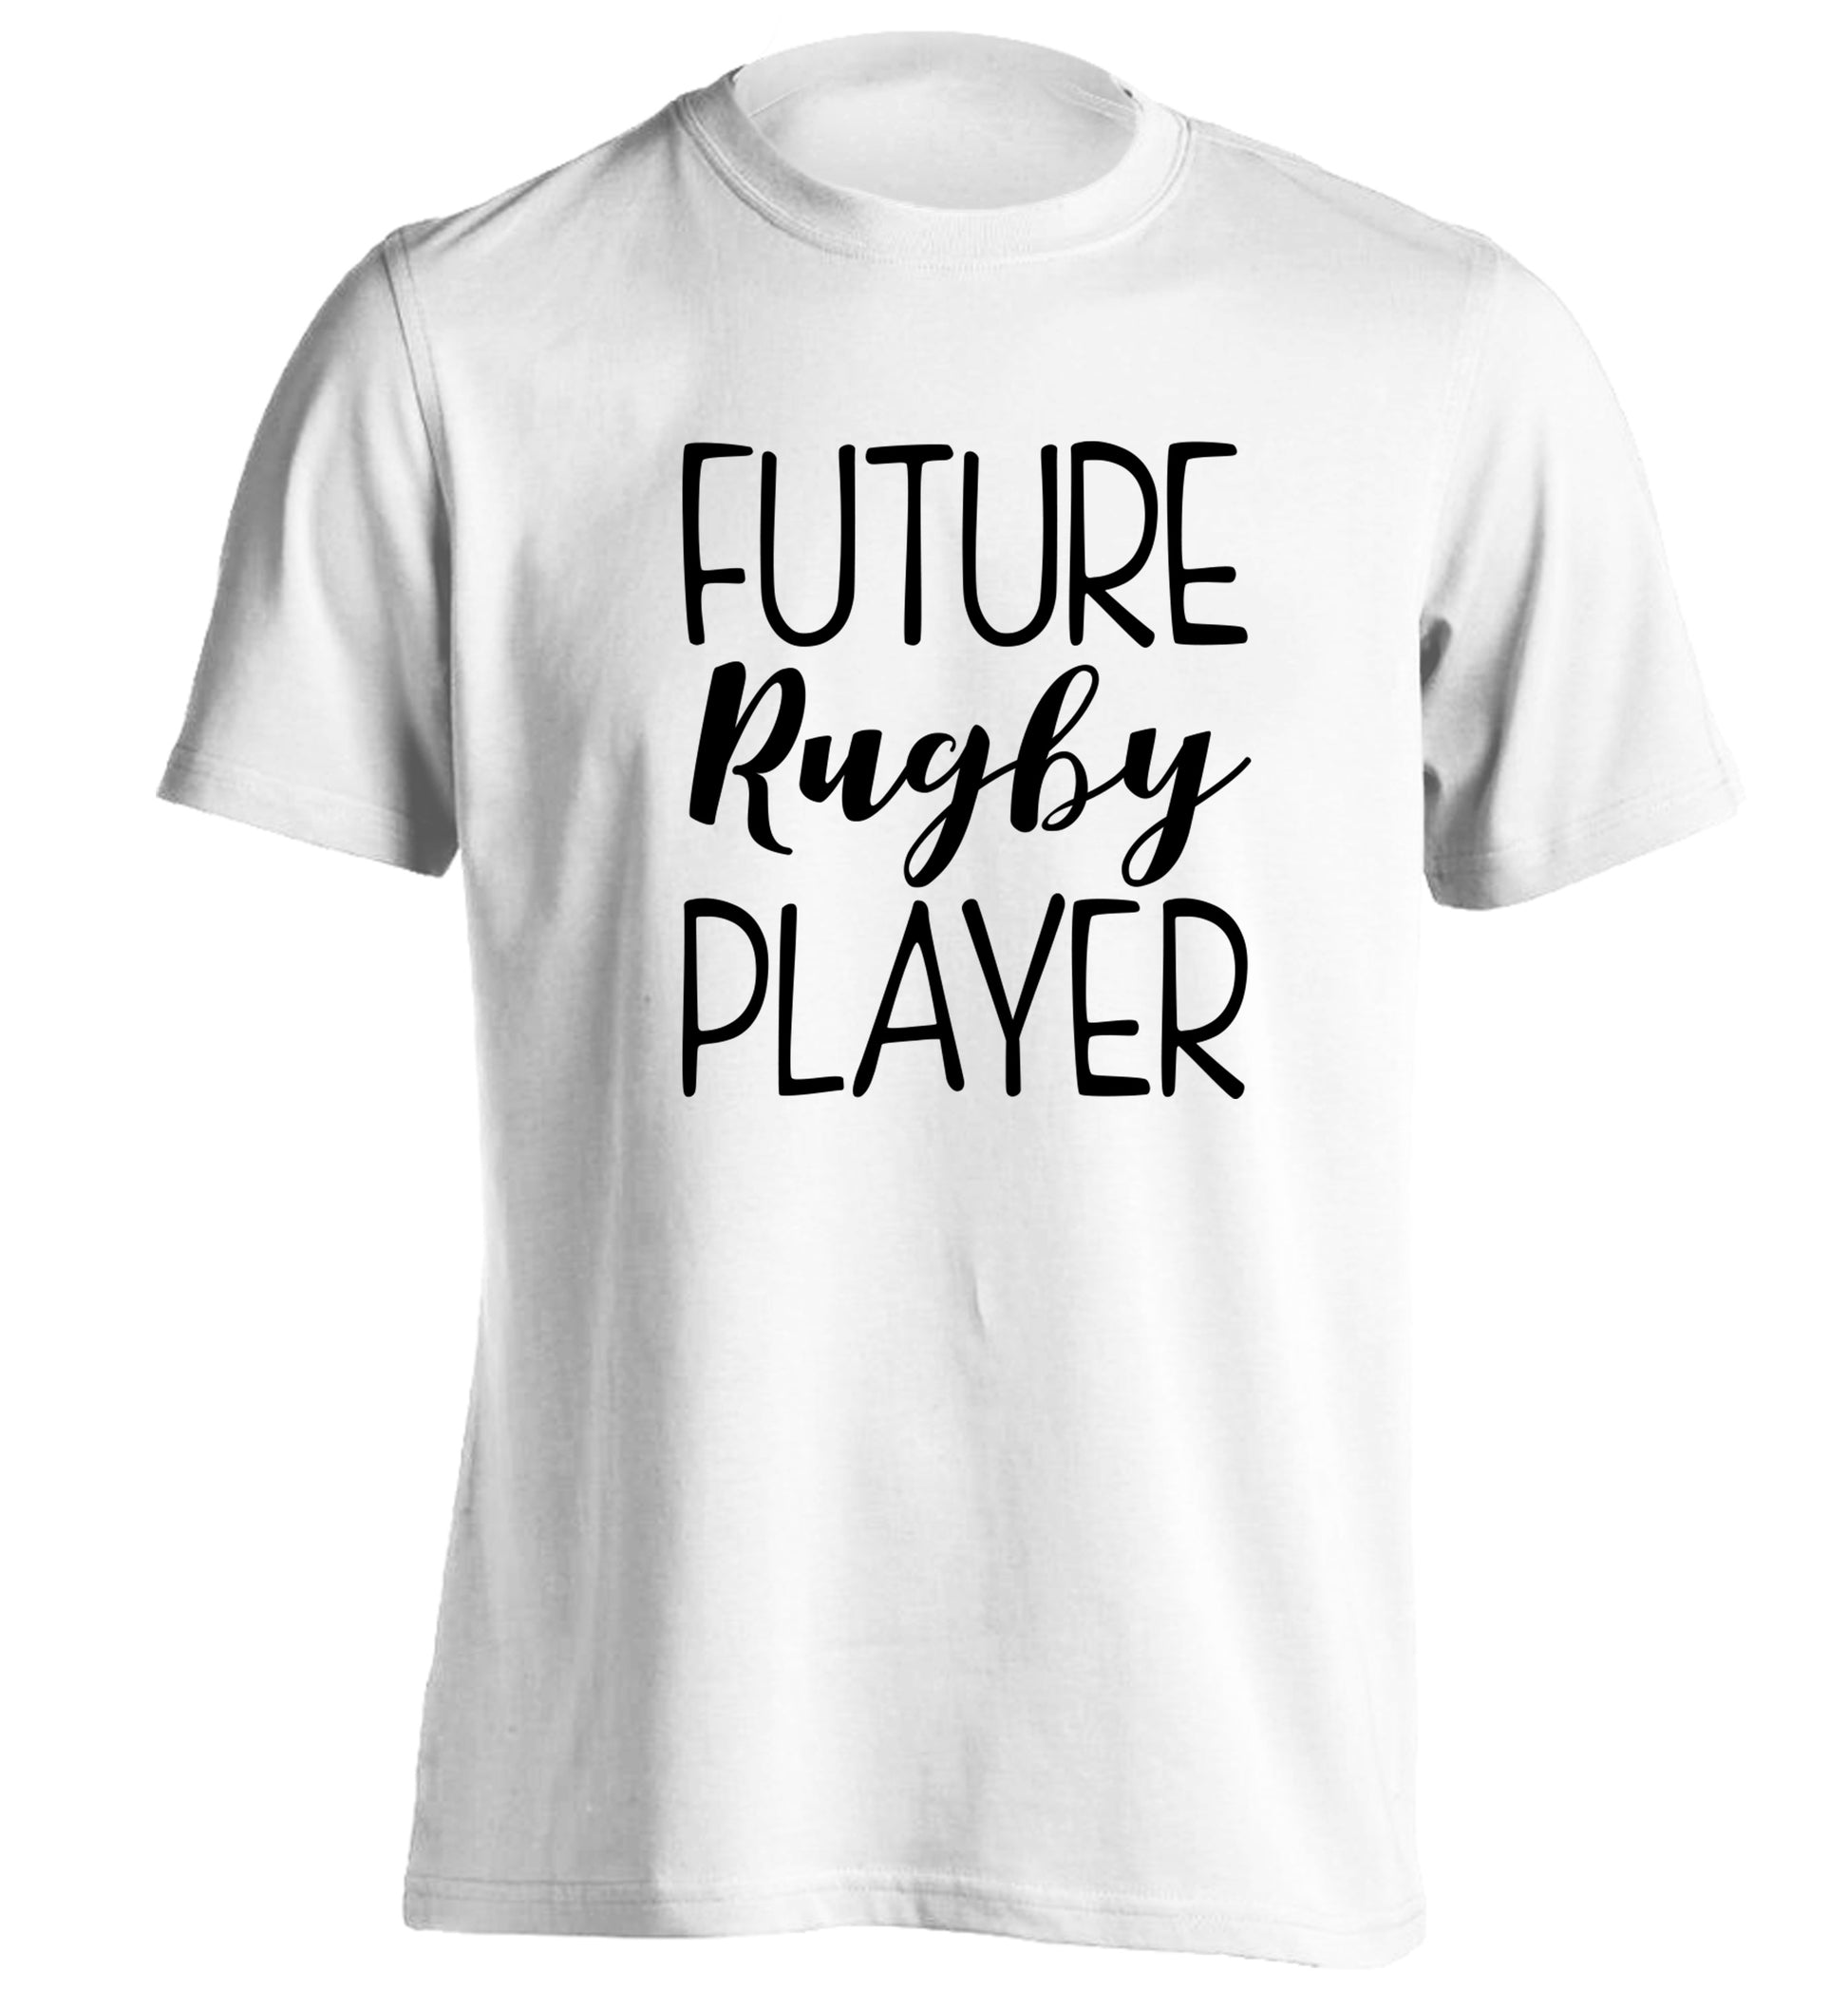 Future rugby player adults unisex white Tshirt 2XL